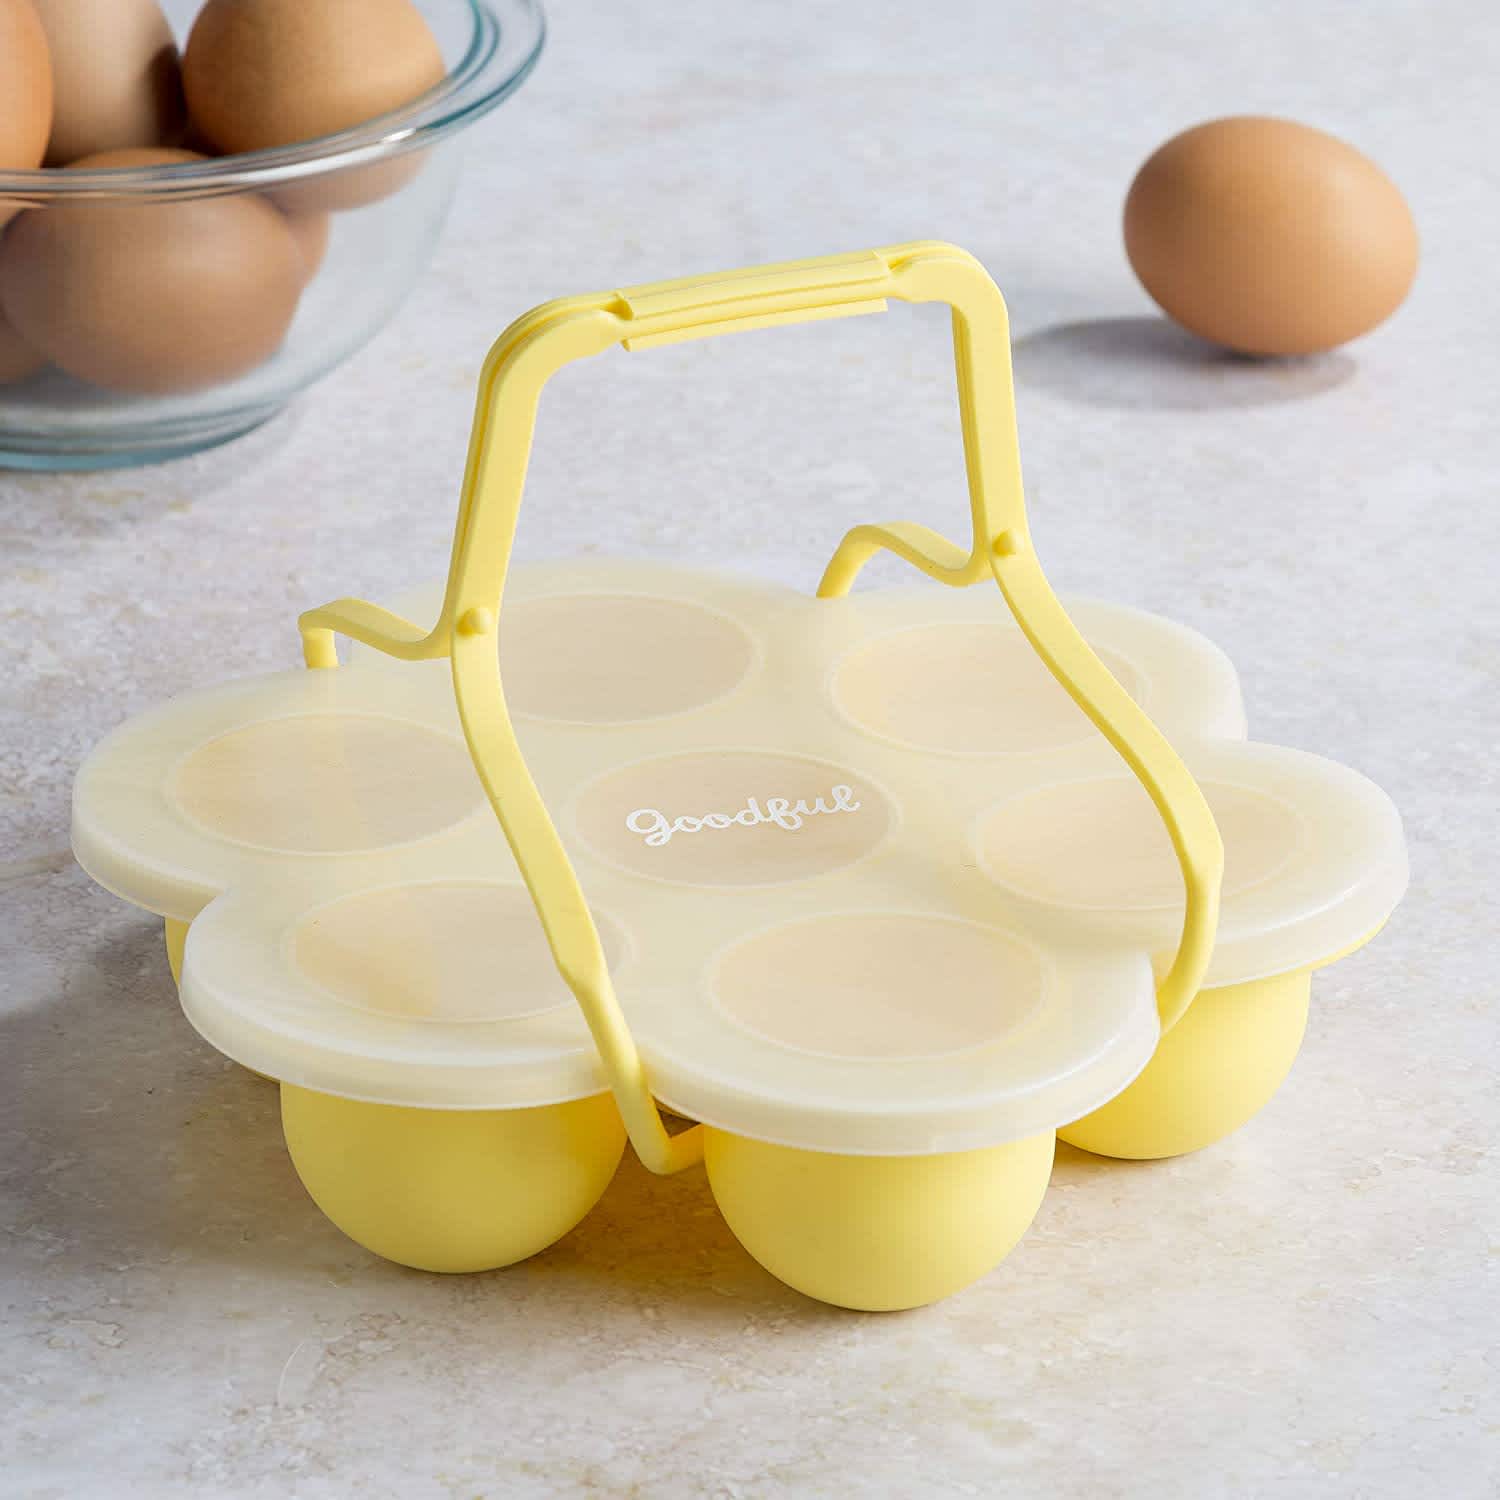 http://cdn.apartmenttherapy.info/image/upload/v1600696204/gen-workflow/product-database/%20Goodful-Premium-Silicone-Egg-Bites-Mold.jpg